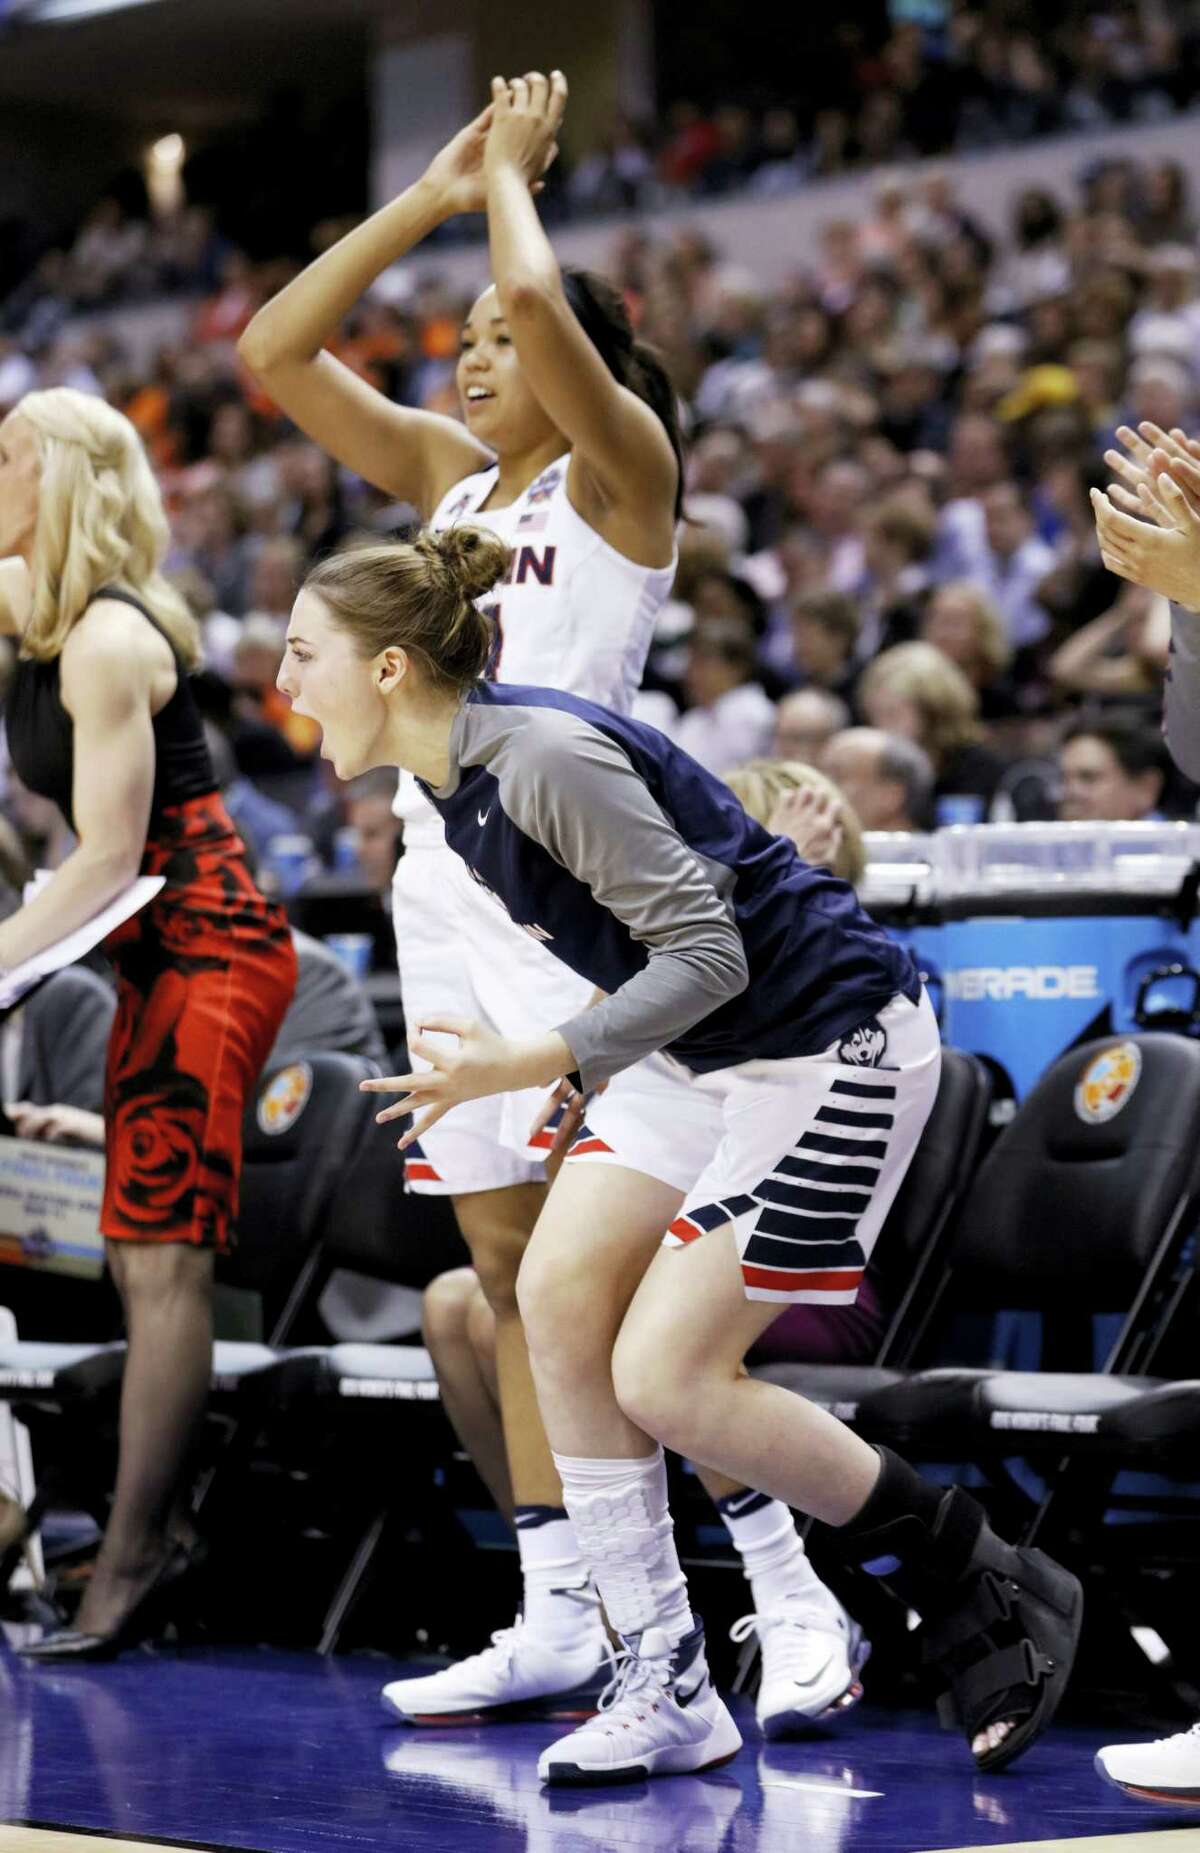 UConn’s Katie Lou Samuelson cheers during the second half of Sunday night’s national semifinal game against Oregon State. Samuelson suffered a season-ending broken foot.